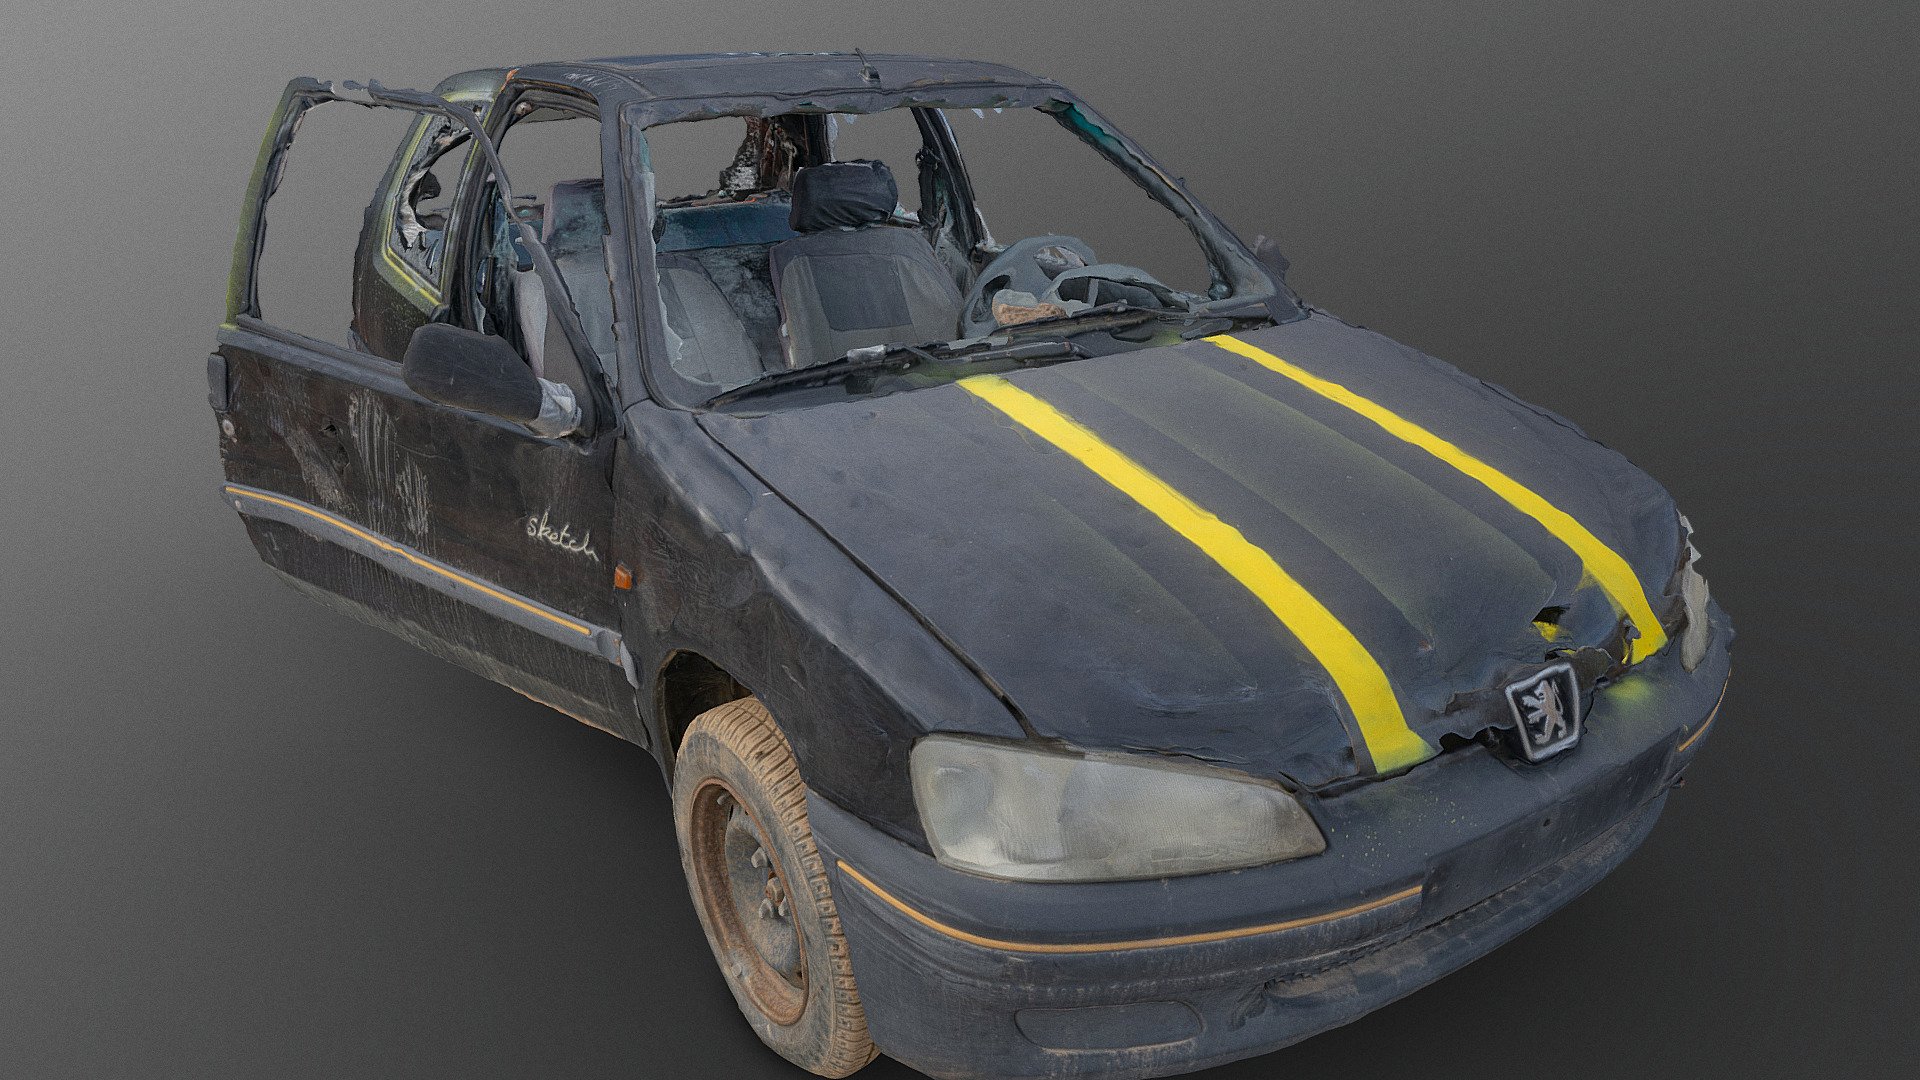 Black peugeot 106 derelict car wreck wreckage crashed accident broken vehicle

Raw Photogrammetry scan 420x24MP, 3x16K texture.

Created in RealityCapture by Capturing Reality

If you download and enjoy the free model, please hit Like - Black car wreck - Download Free 3D model by matousekfoto 3d model